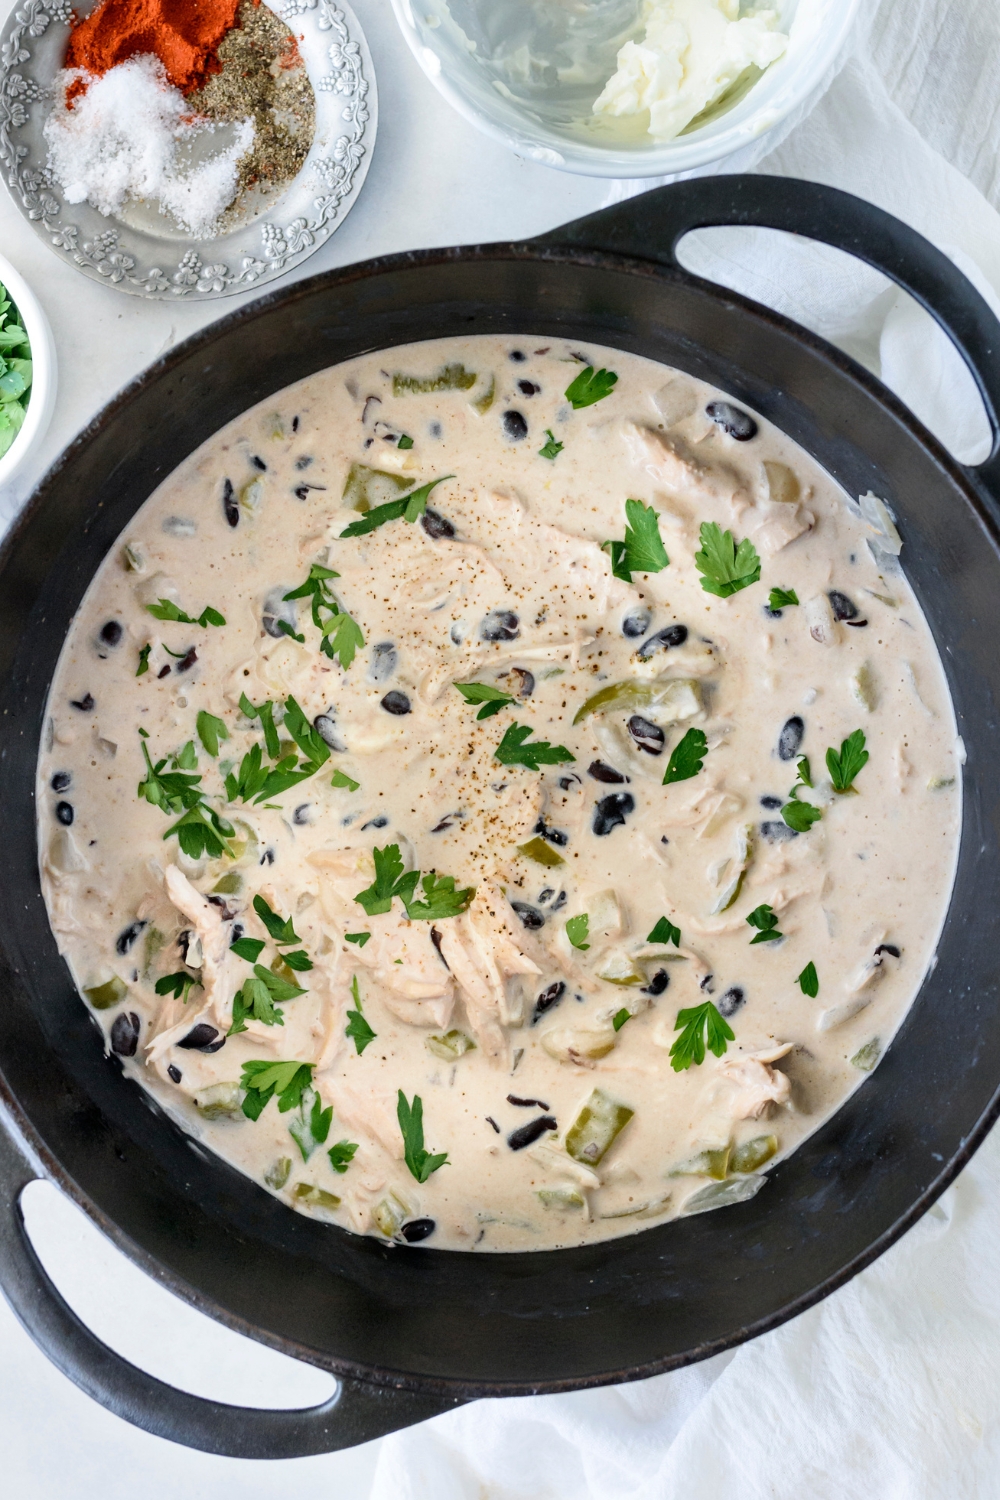 A black pot filled with white chicken chili with parsley on top and black beans floating in the chili.